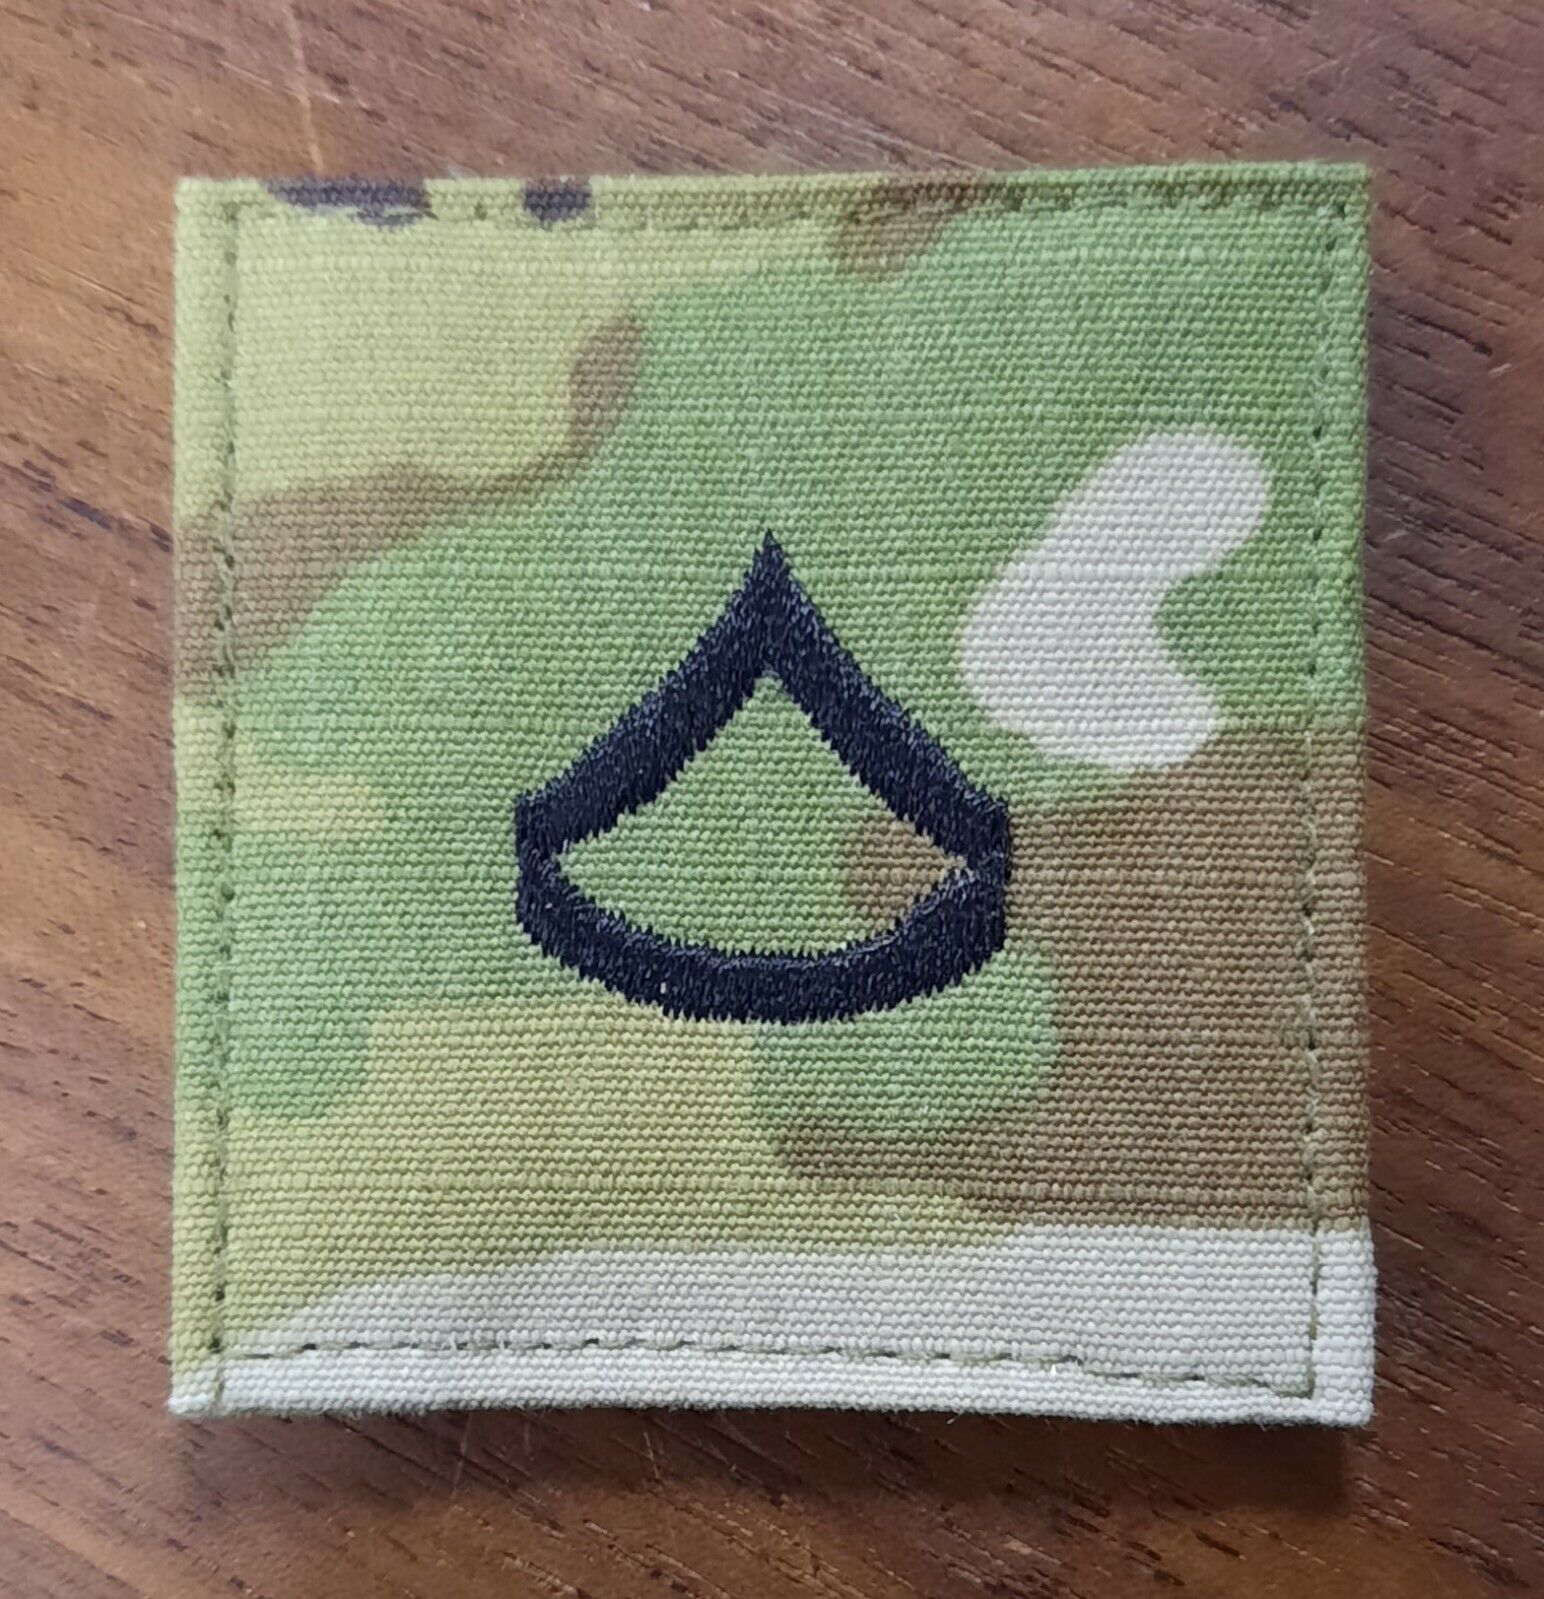 US Army OCP Rank E-3 PFC Patch w/ Hook Fastener Uniform Ready Made in USA